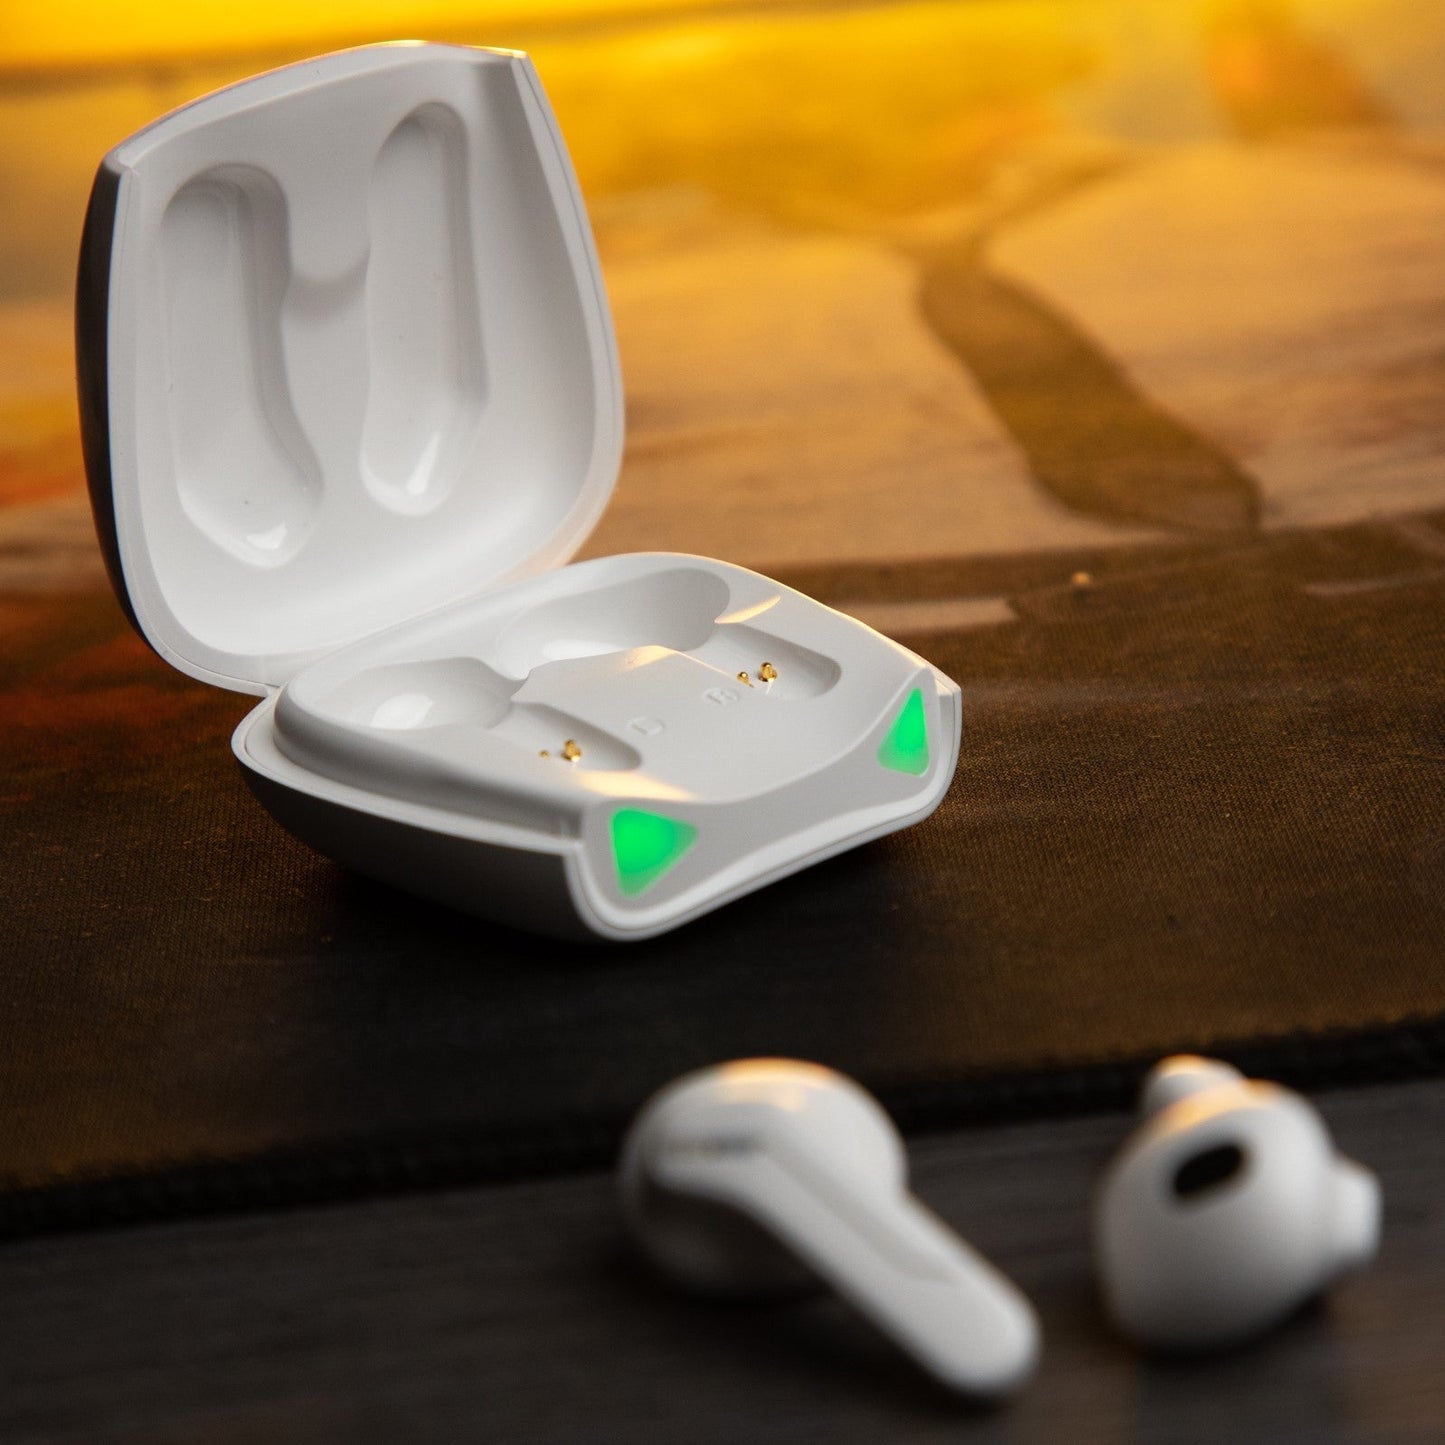 AirPods RECCI  RT 12